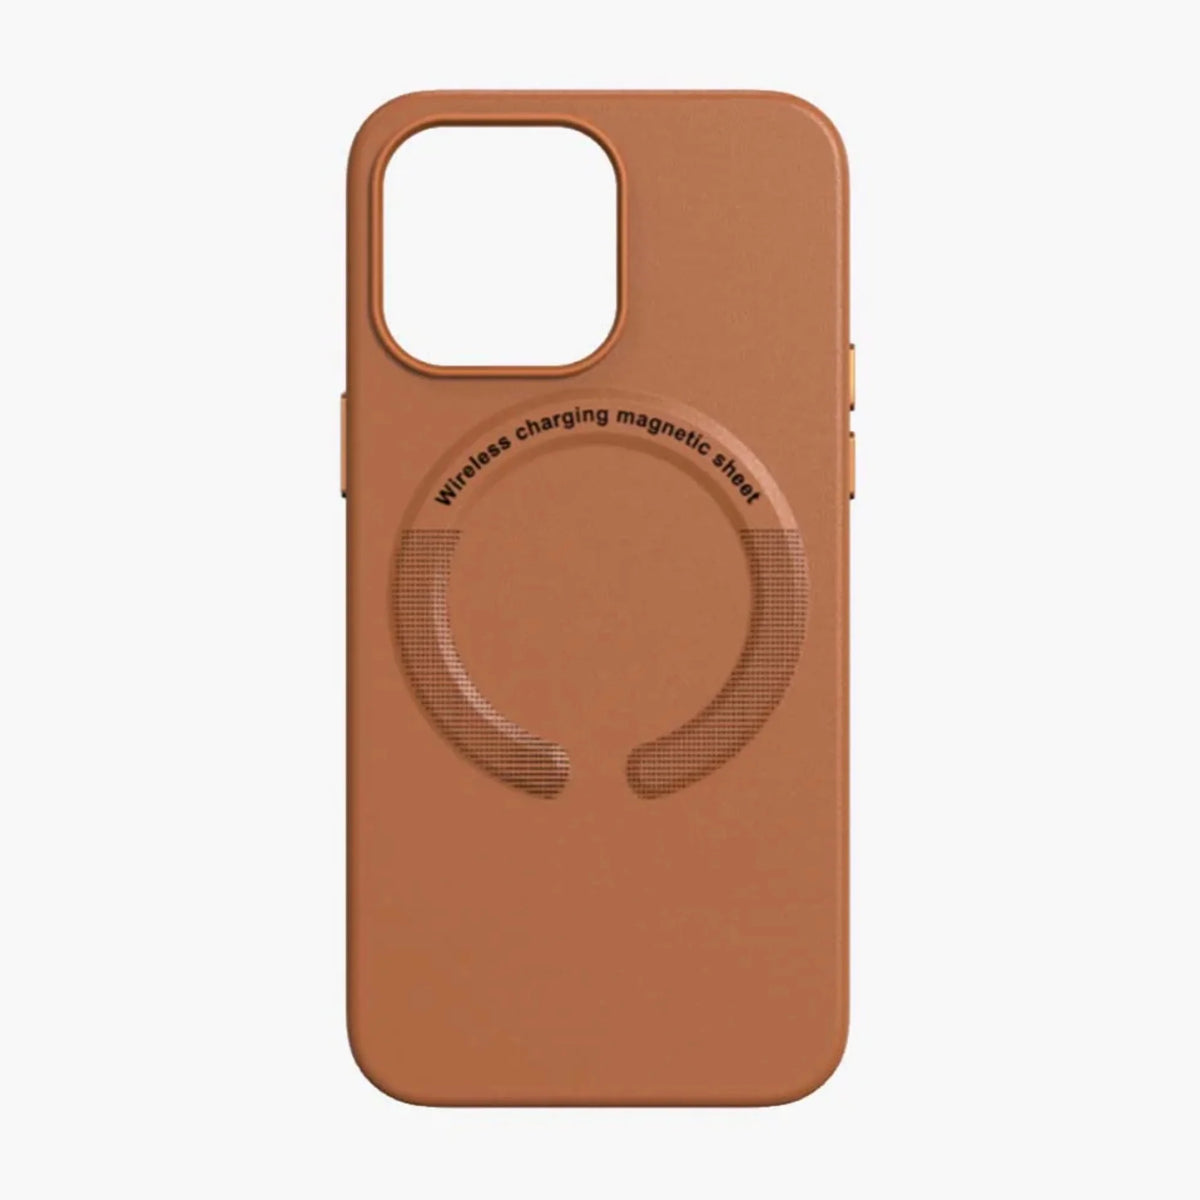 iPhone Leather Magsafe Case - Golden Brown